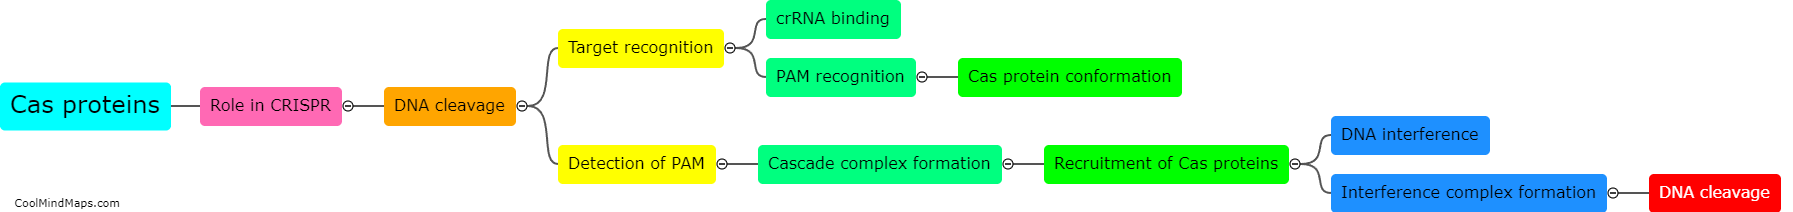 What is the role of Cas proteins in the CRISPR system?